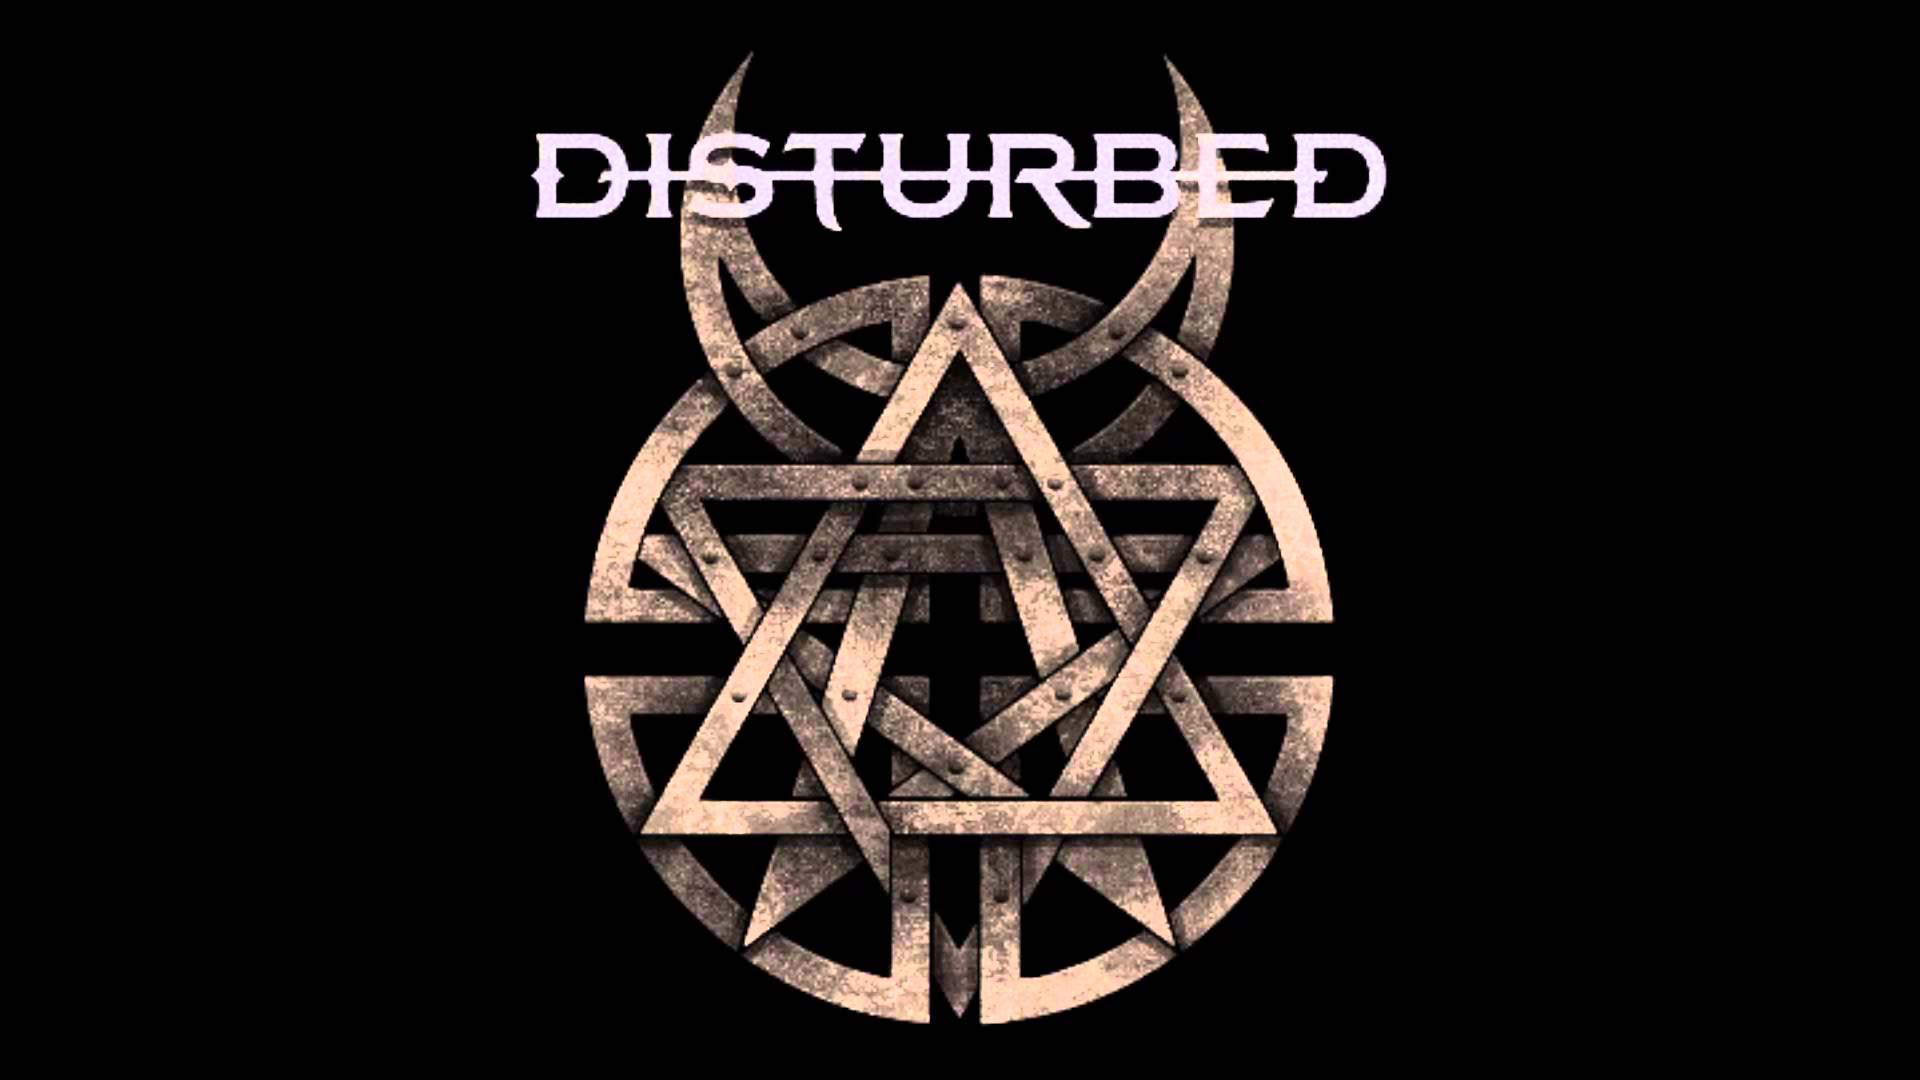 Disturbed Logo - Heavy Metal image Disturbed logo HD wallpaper and background photo